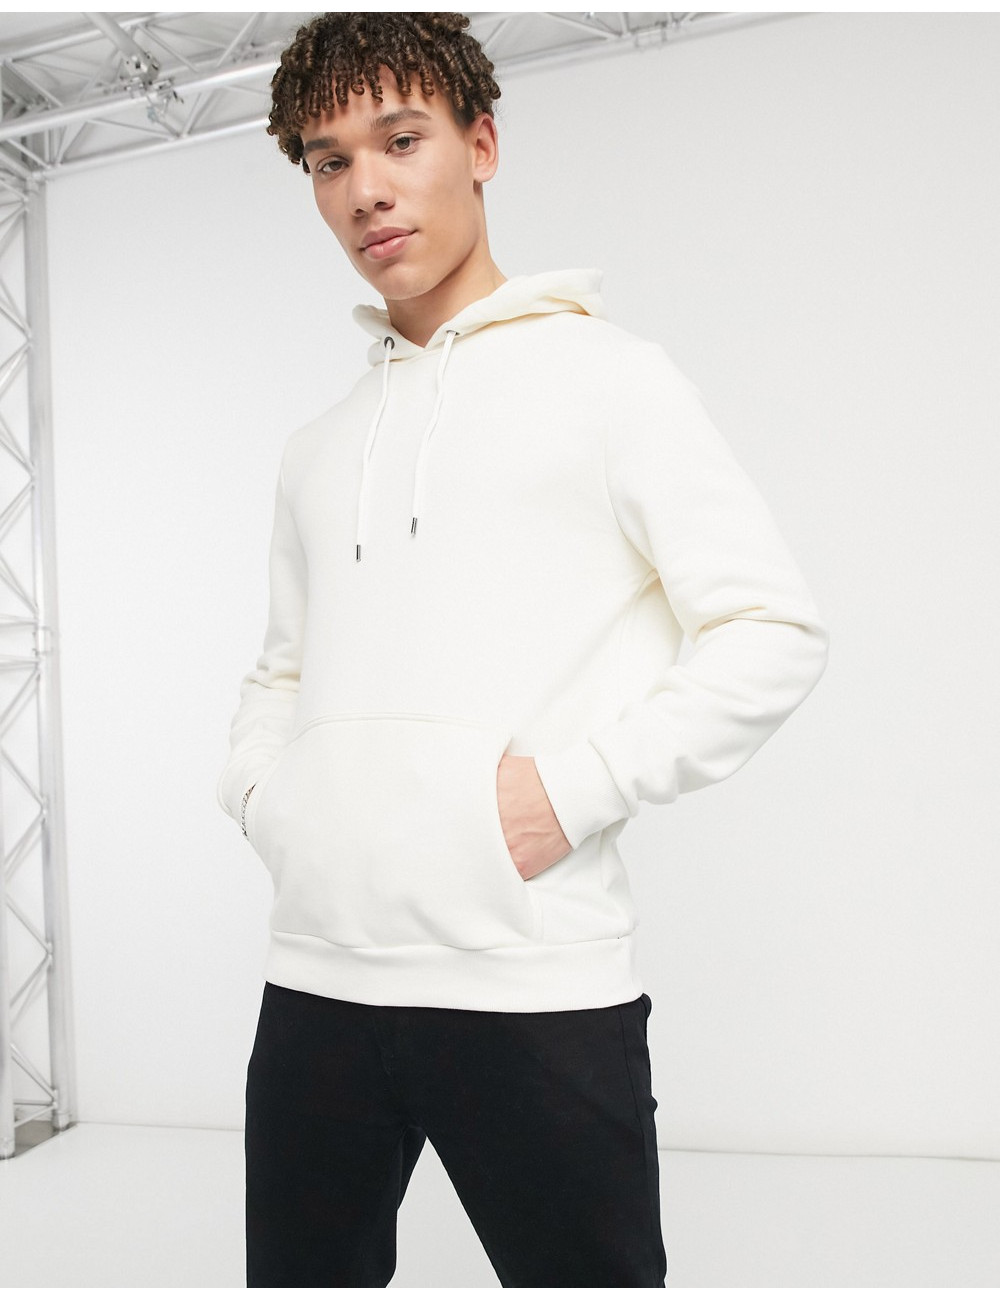 River Island hoodie in white